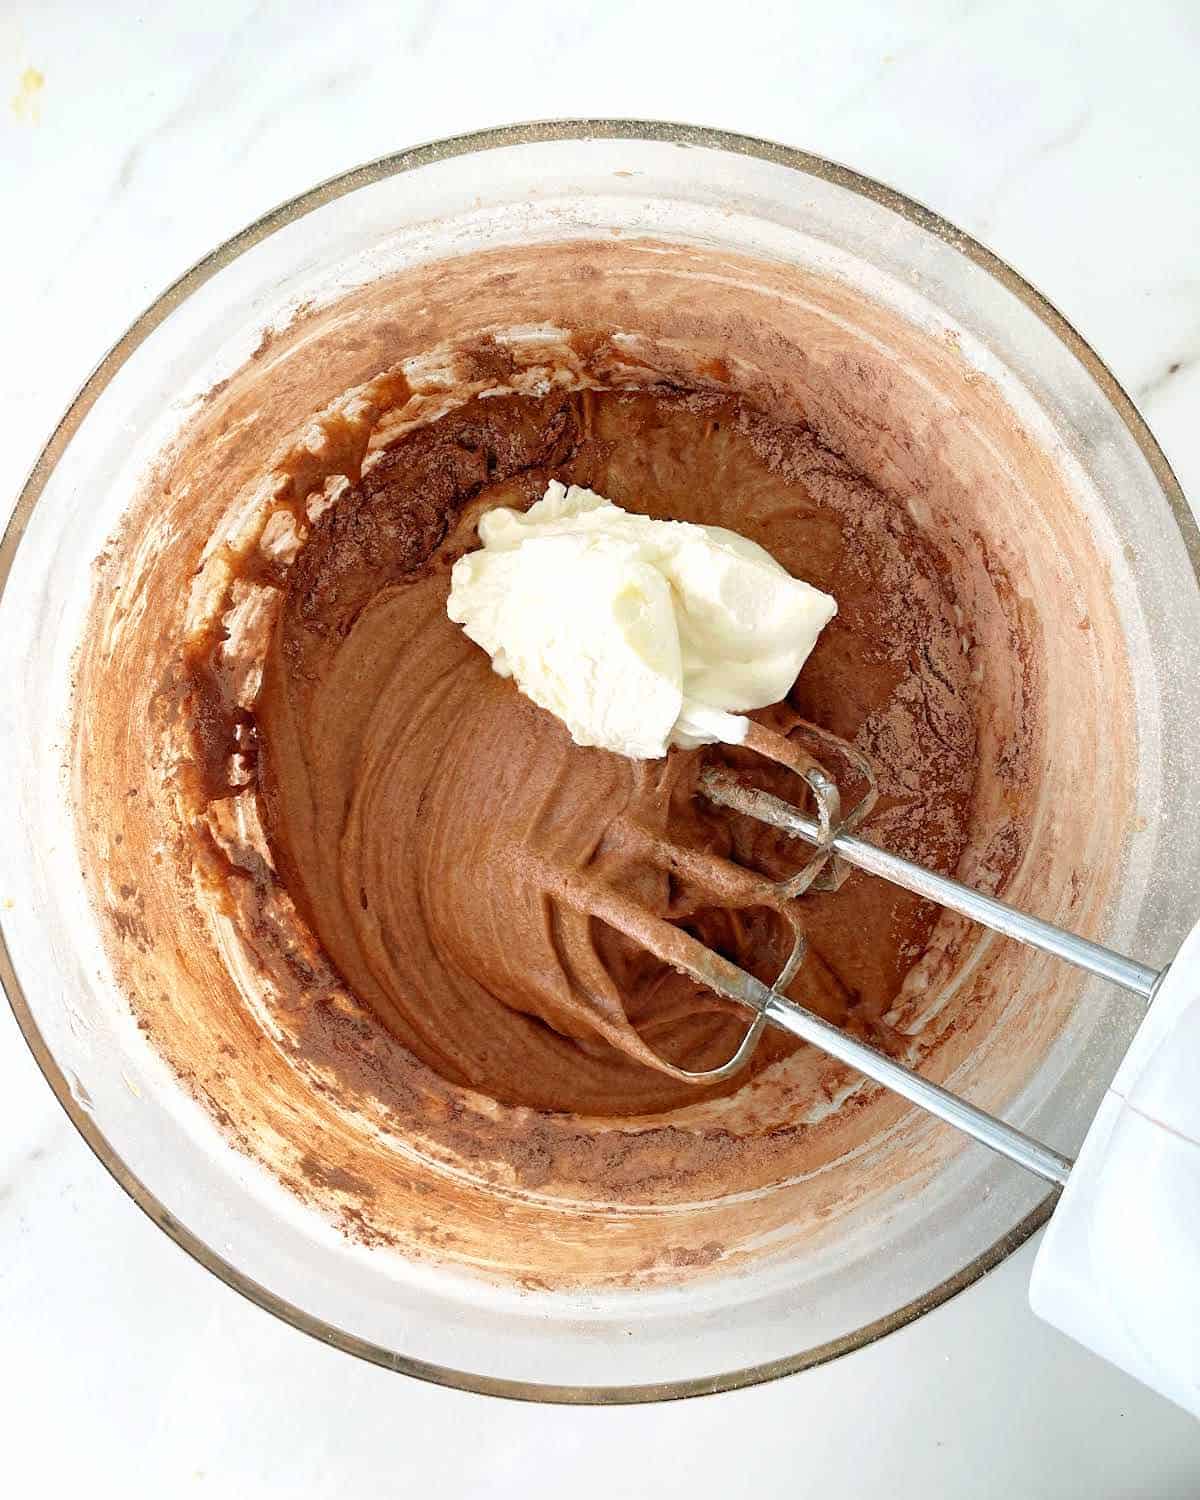 Sour cream added to chocolate cake batter in a glass bowl with electric beaters in it. White surface.